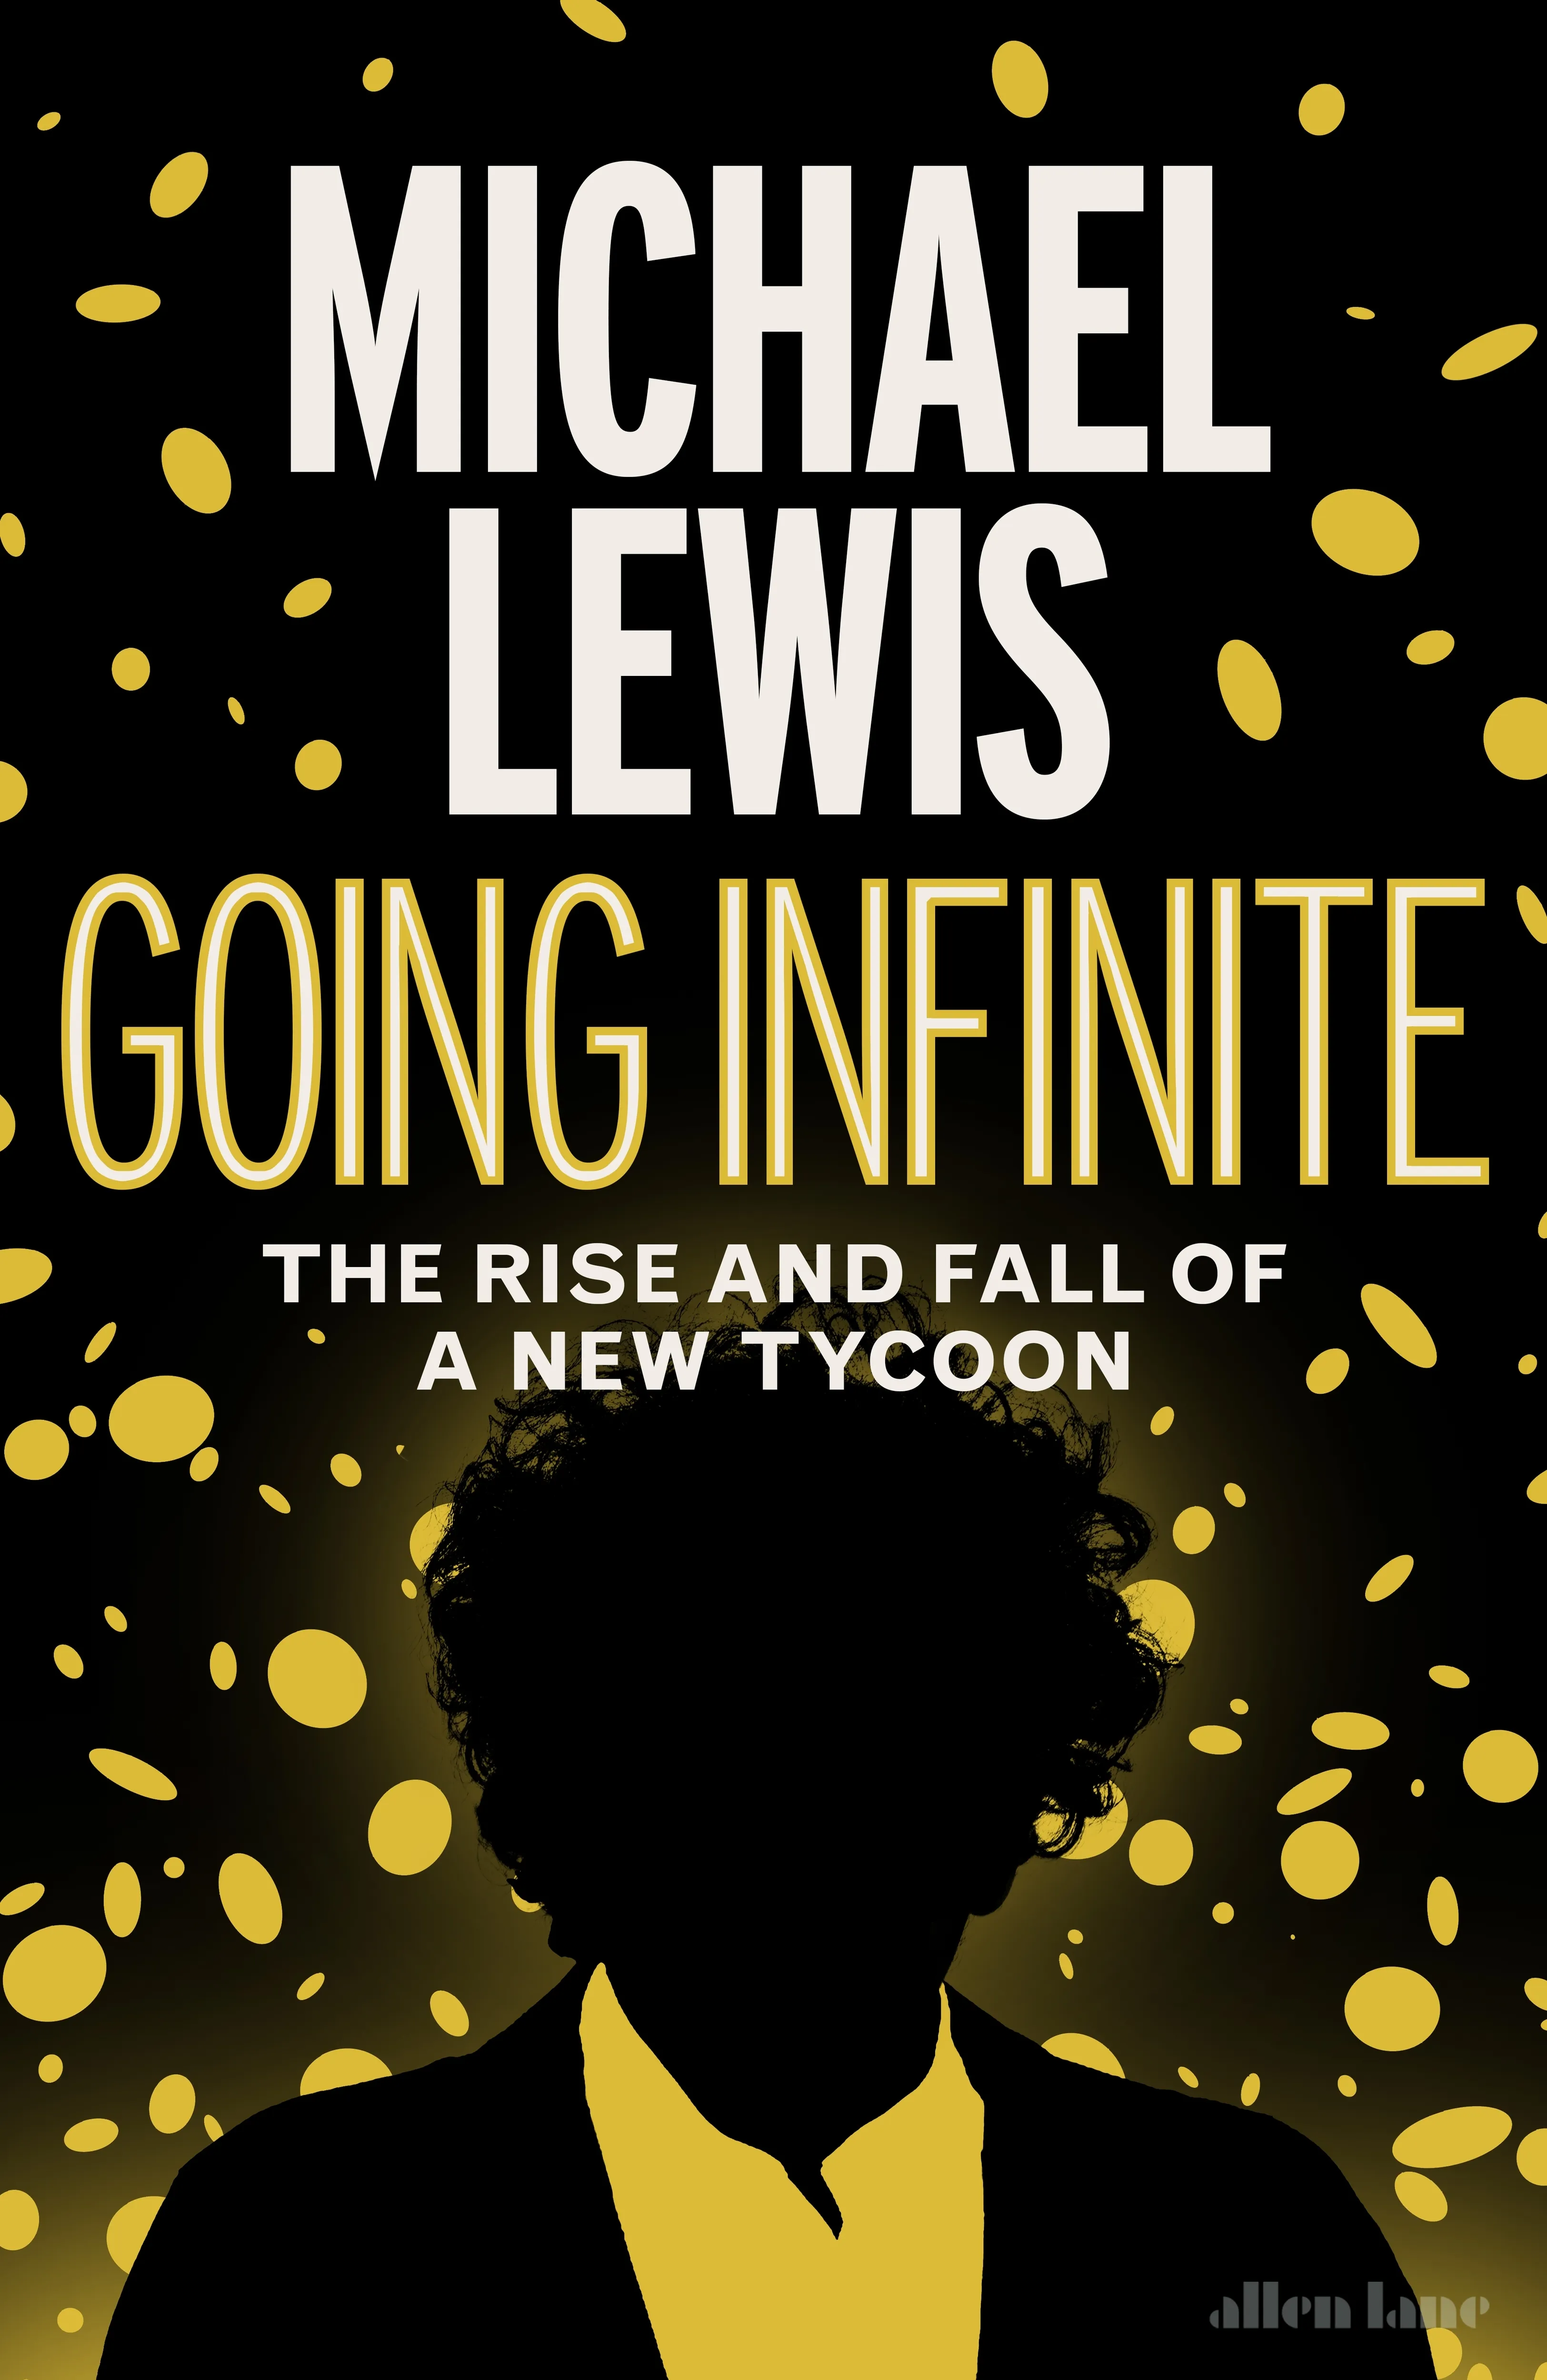 A cover image of the book titled Going Infinite